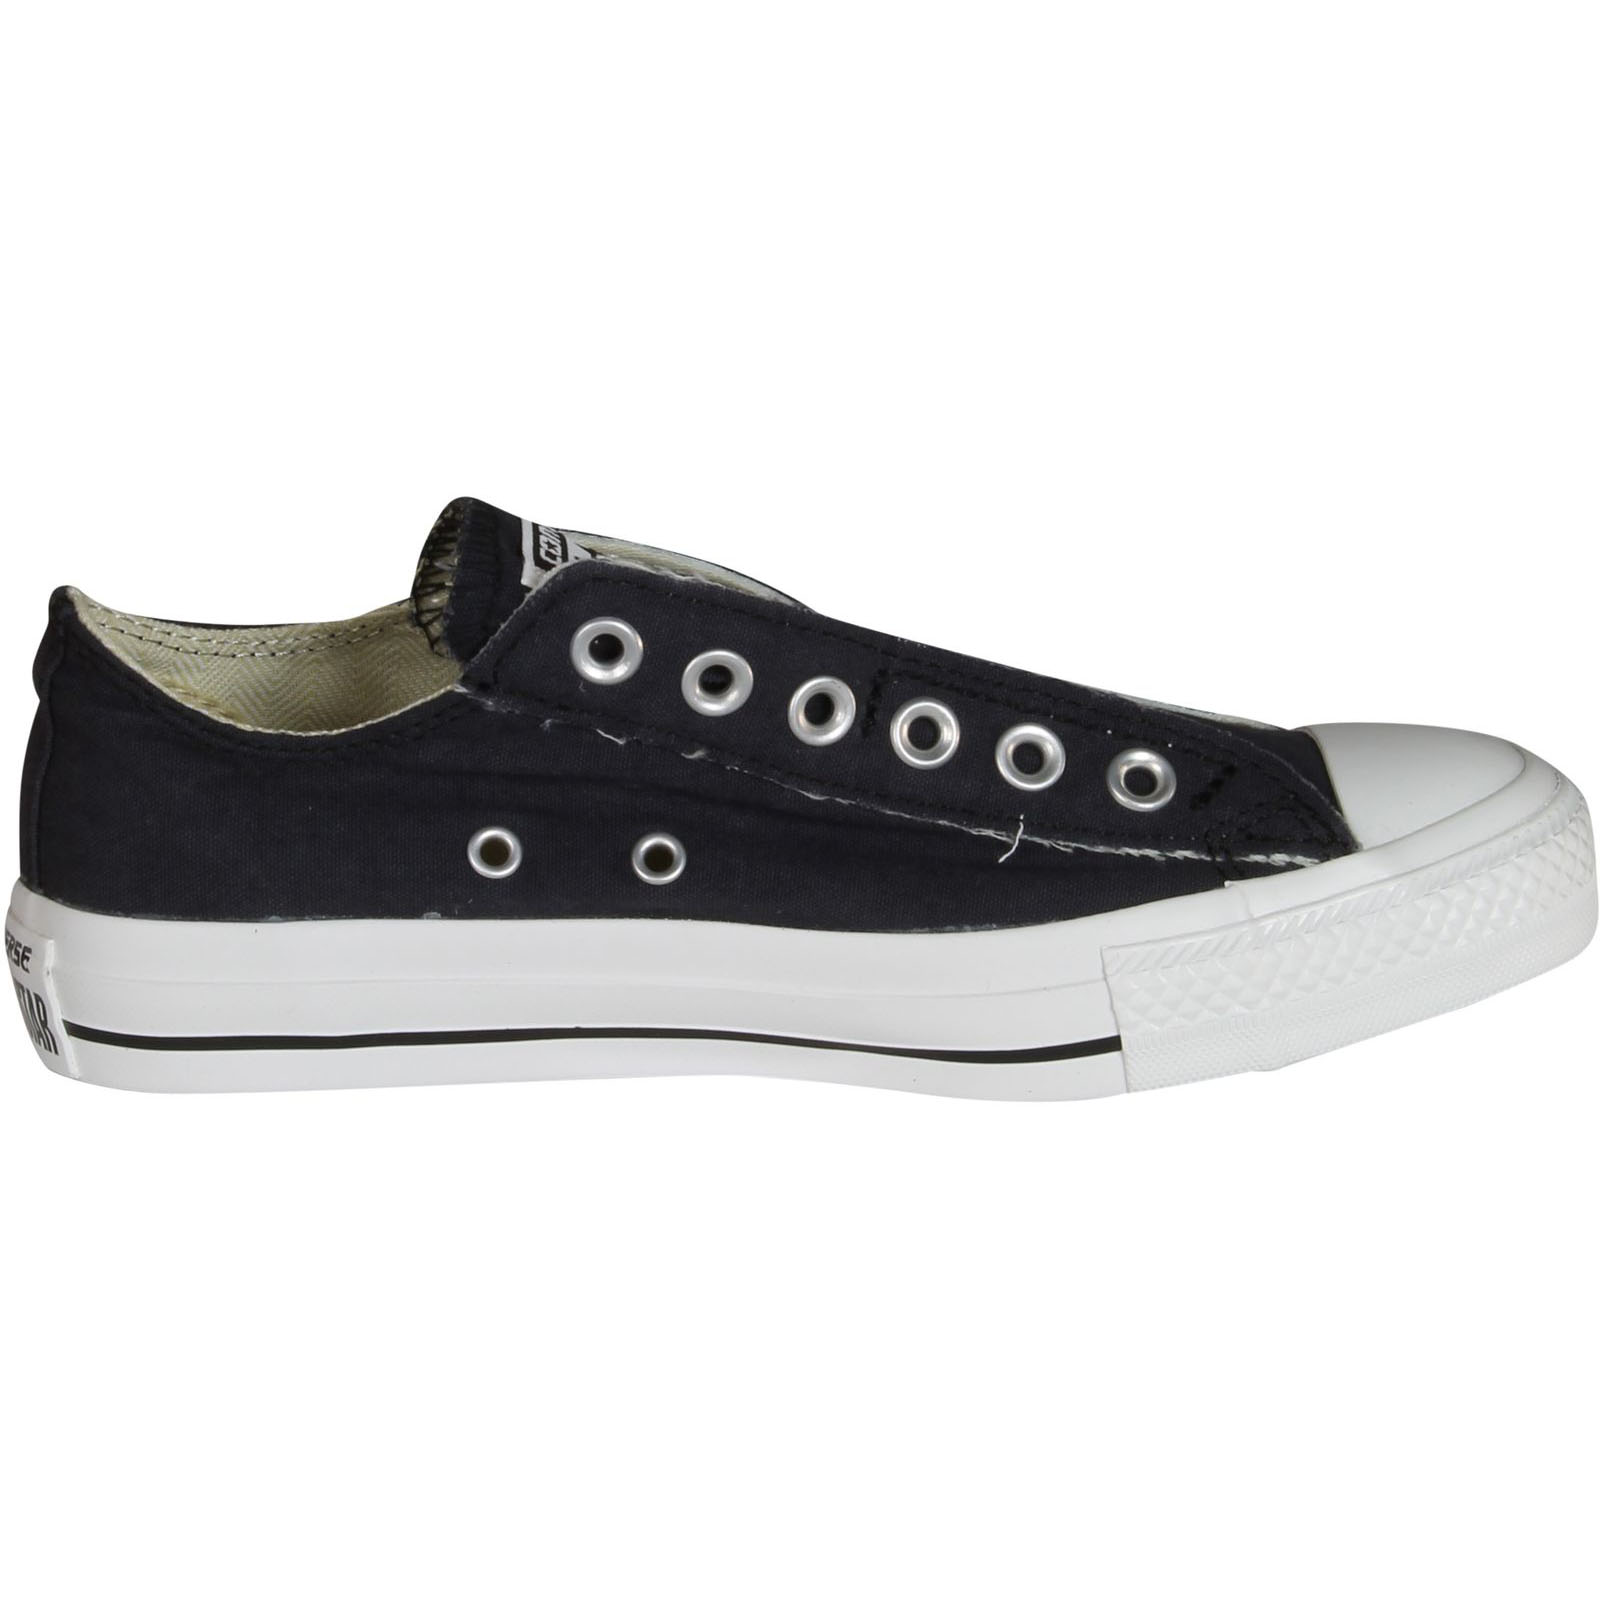 Mens Converse Chuck Taylor All Star Slip On OX Low Top Black White 1T3 - image 2 of 4